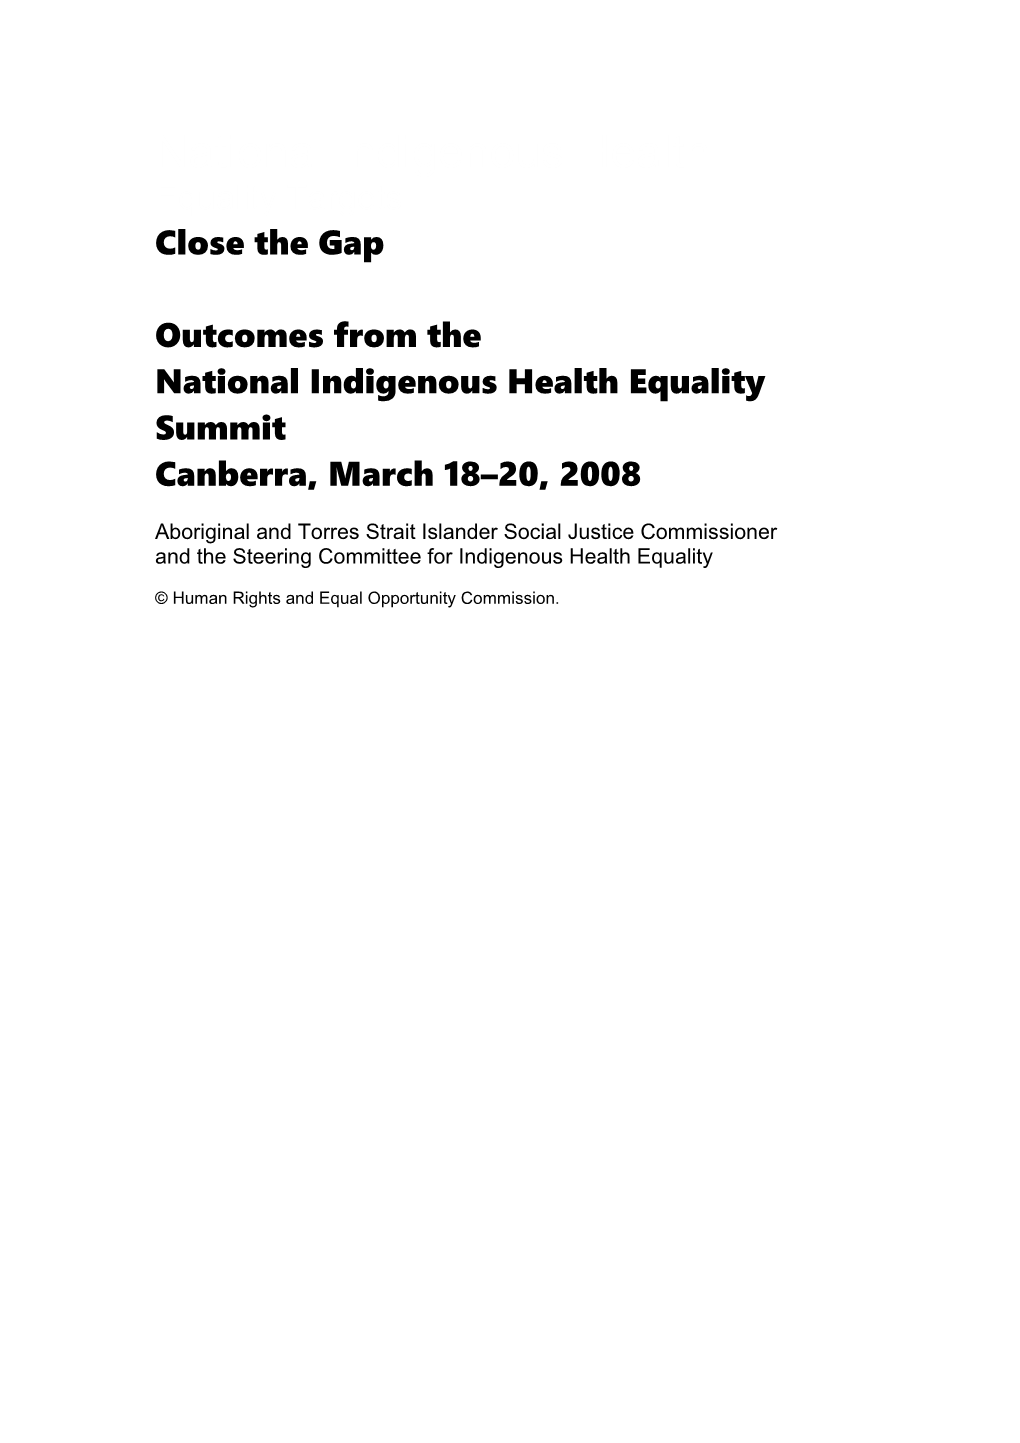 National Indigenous Health